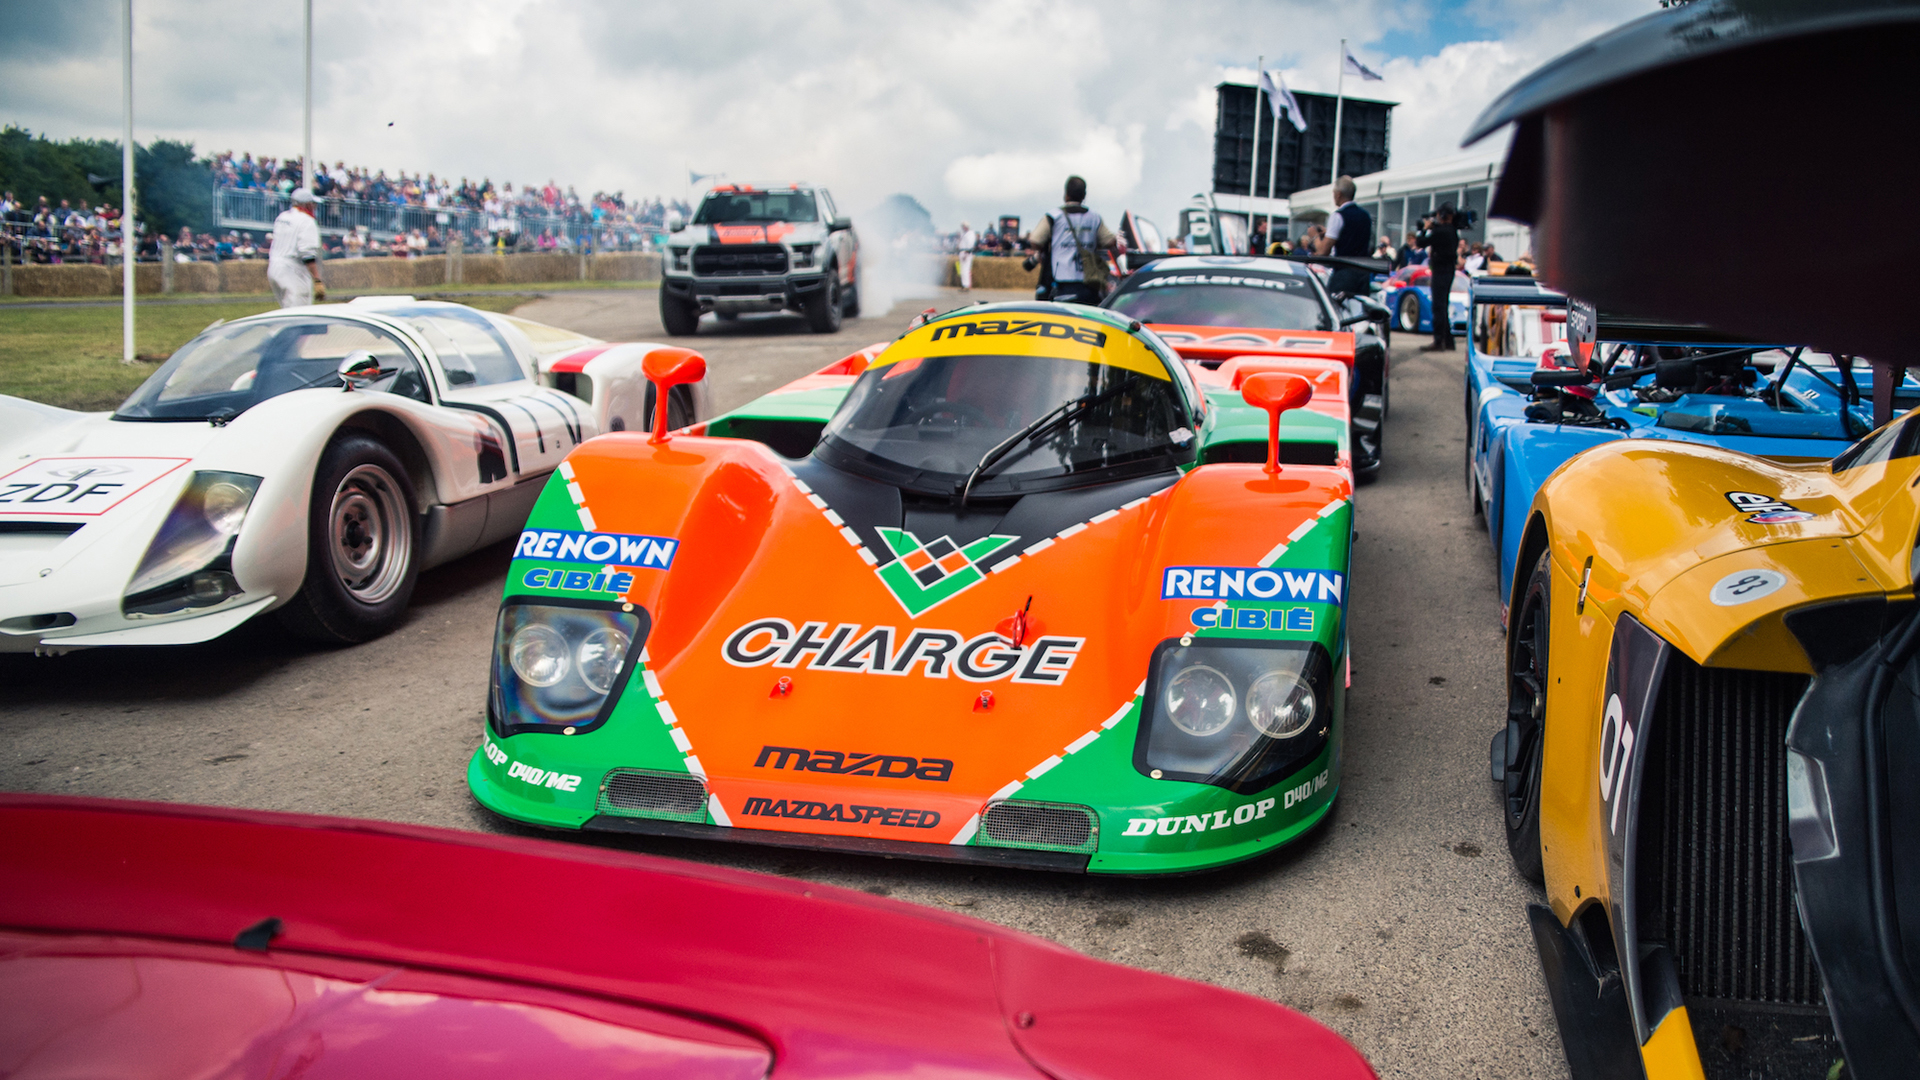 In the foreground the Mazda winner of the 24 Hours of Le Mans in 1991 and other prototypes (@GoodwoodRRC)